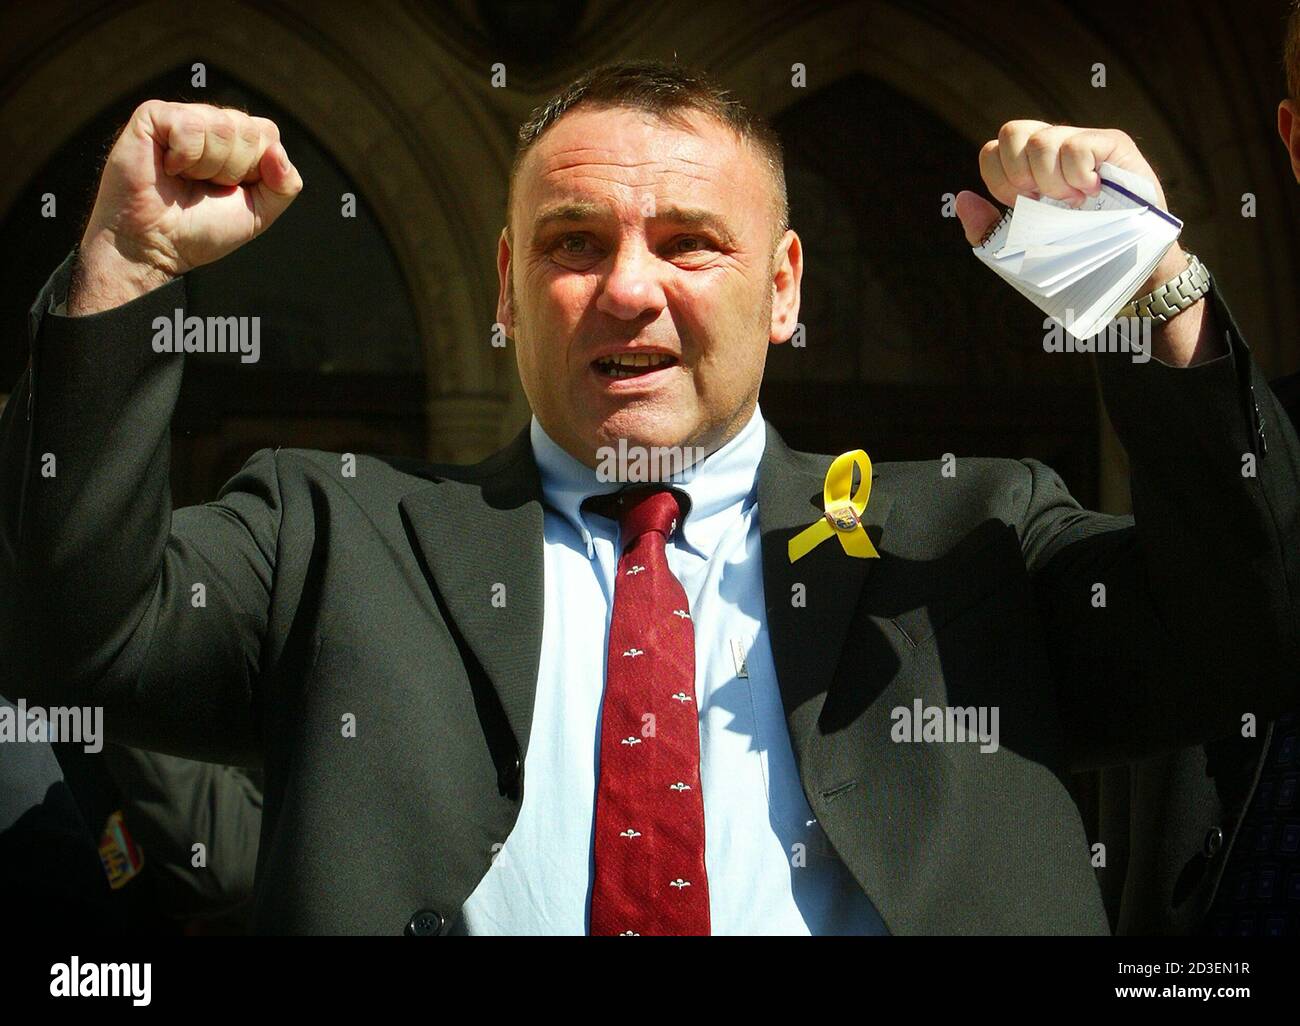 British Gulf War veteran, former Parachute Regiment medical officer Shaun Rusling, celebrates after the High Court upheld a ruling that he is entitled to a pension because he is suffering from a syndrome linked to his service in the 1991 Gulf War, in London, June 13, 2003. The ruling may make it easier for other veterans who say their health has been wrecked to claim damages, although the judge made it clear that the ruling does not mean official recognition of the generic concept of Gulf War Syndrome and that subsequent cases would be considered on their individual merits. REUTERS/Peter Macdi Stock Photo